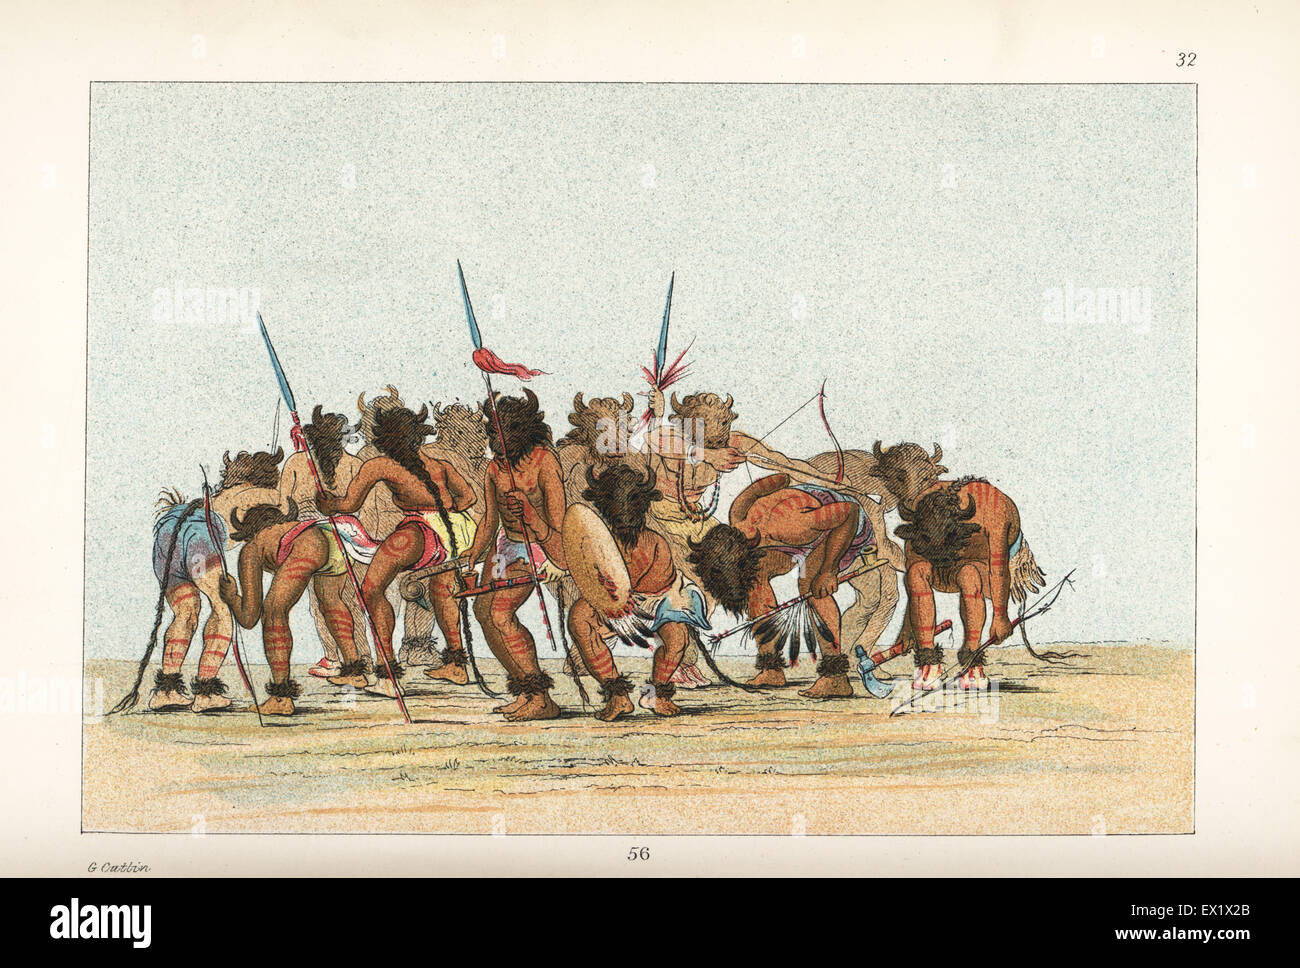 Nonsens Mangle avis Mandan men dancing the buffalo dance wearing bison heads and holding  spears, tomahawks and bows. Handcoloured lithograph from George Catlin's  Manners, Customs and Condition of the North American Indians, London, 1841  Stock